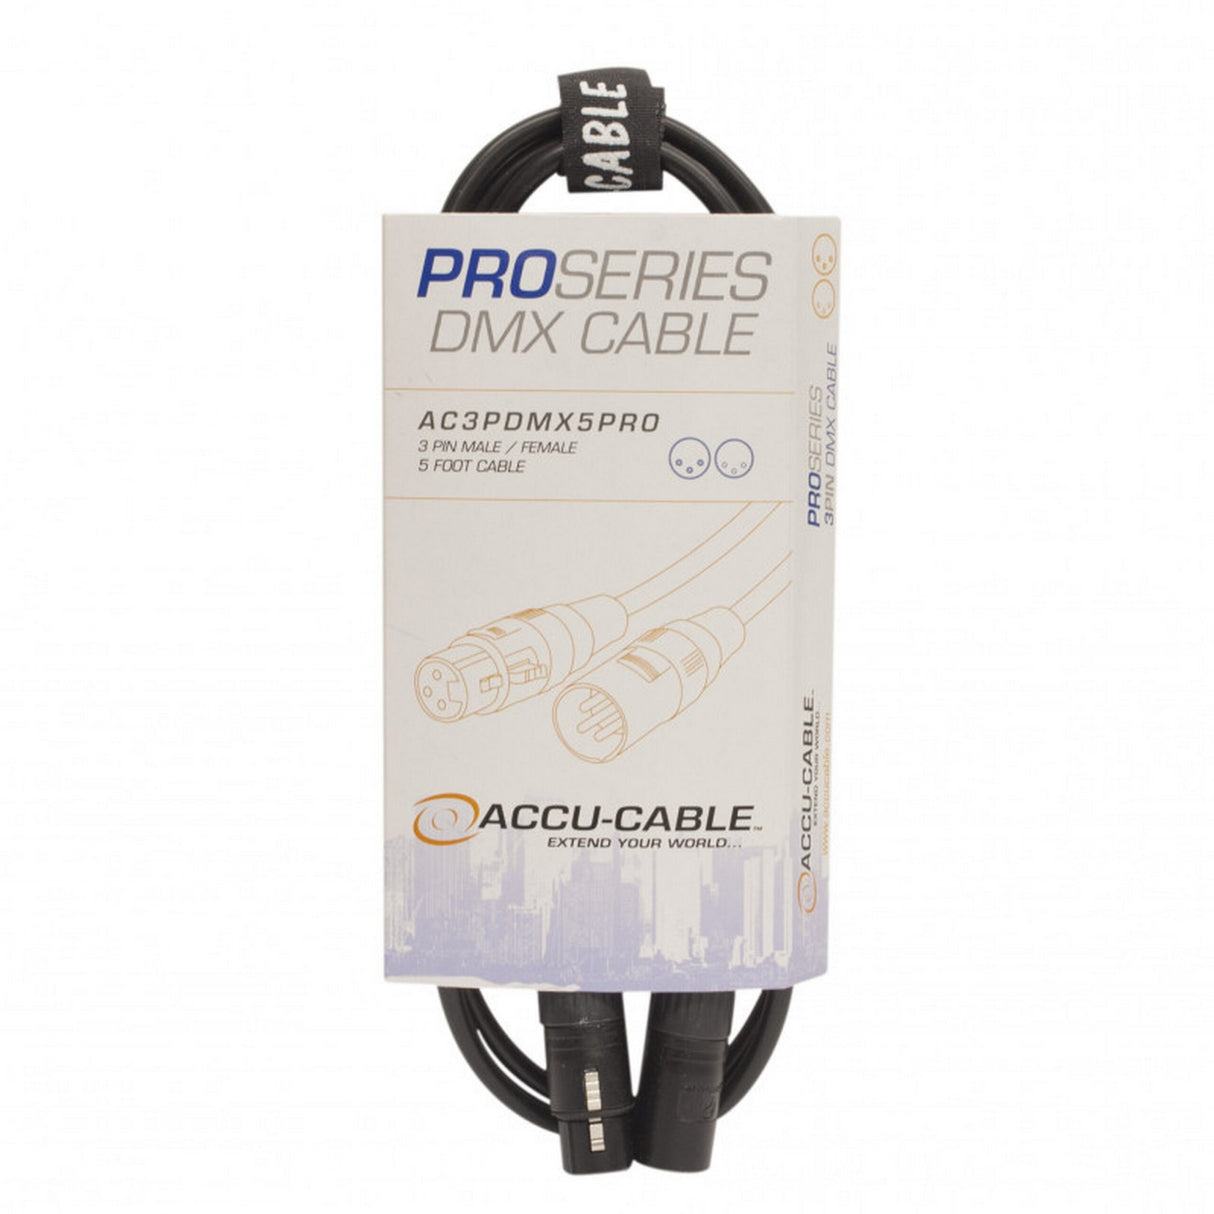 Accu Cable AC3PDMX5PRO Pro Series 5-Foot 3-Pin Male to 3-Pin Female DMX Cable